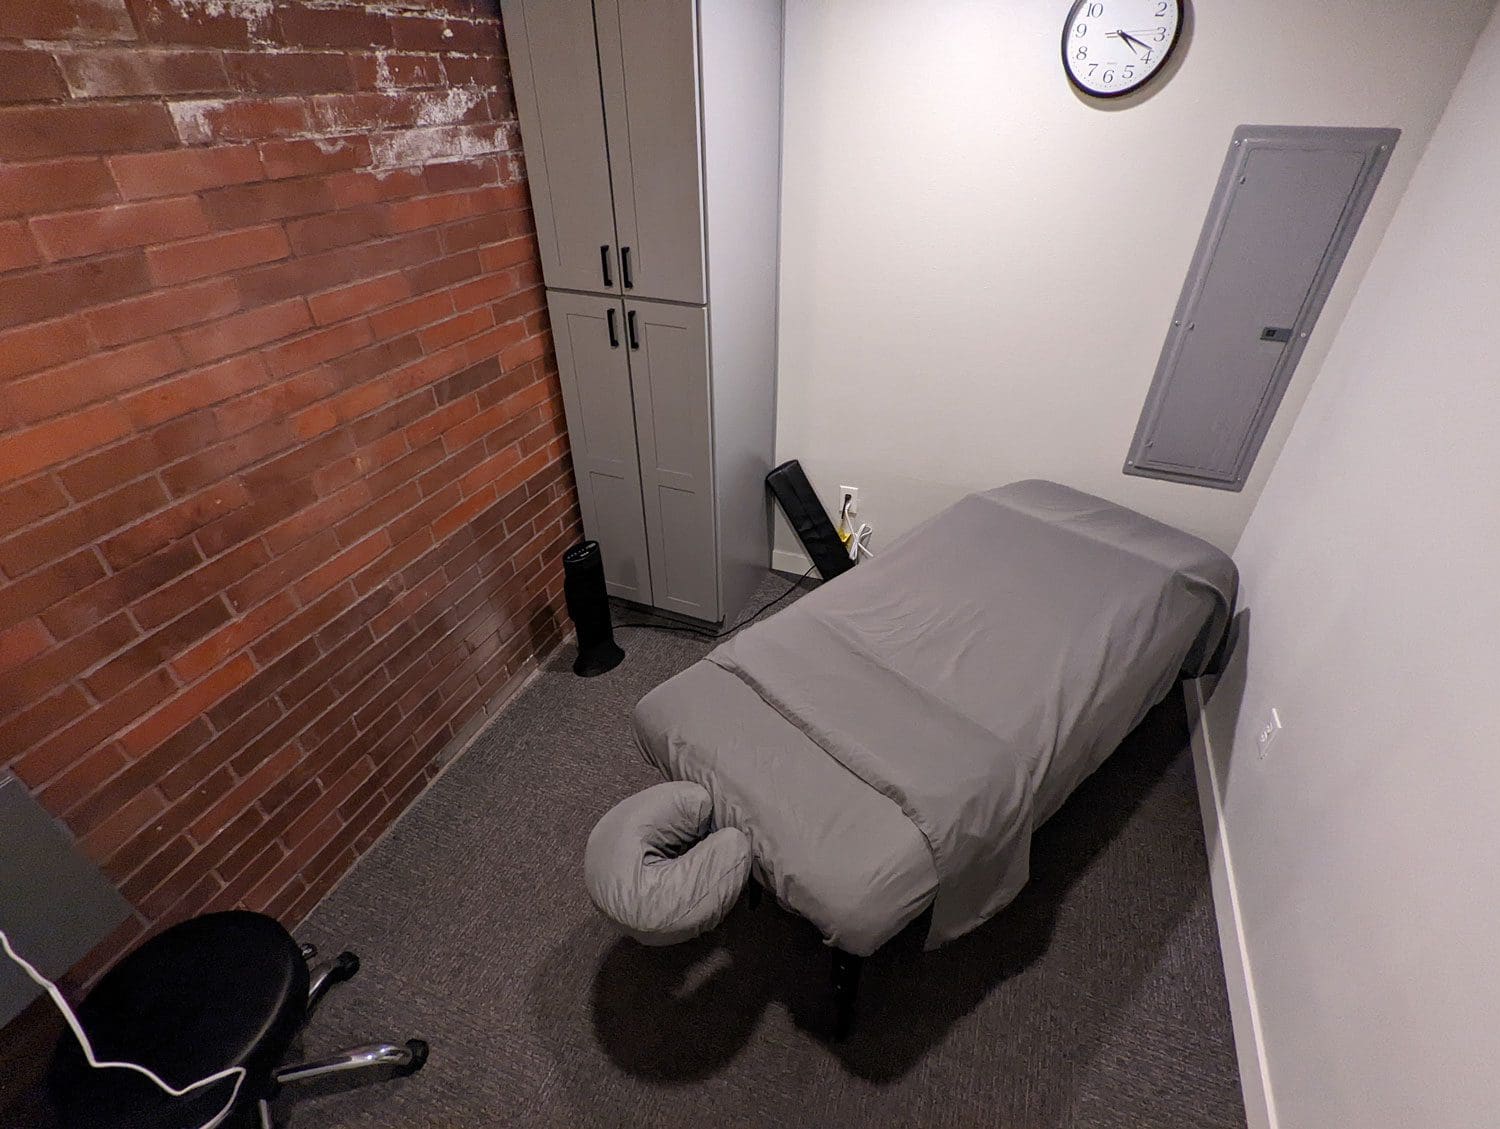 Clackamas massage therapy room with massage table.